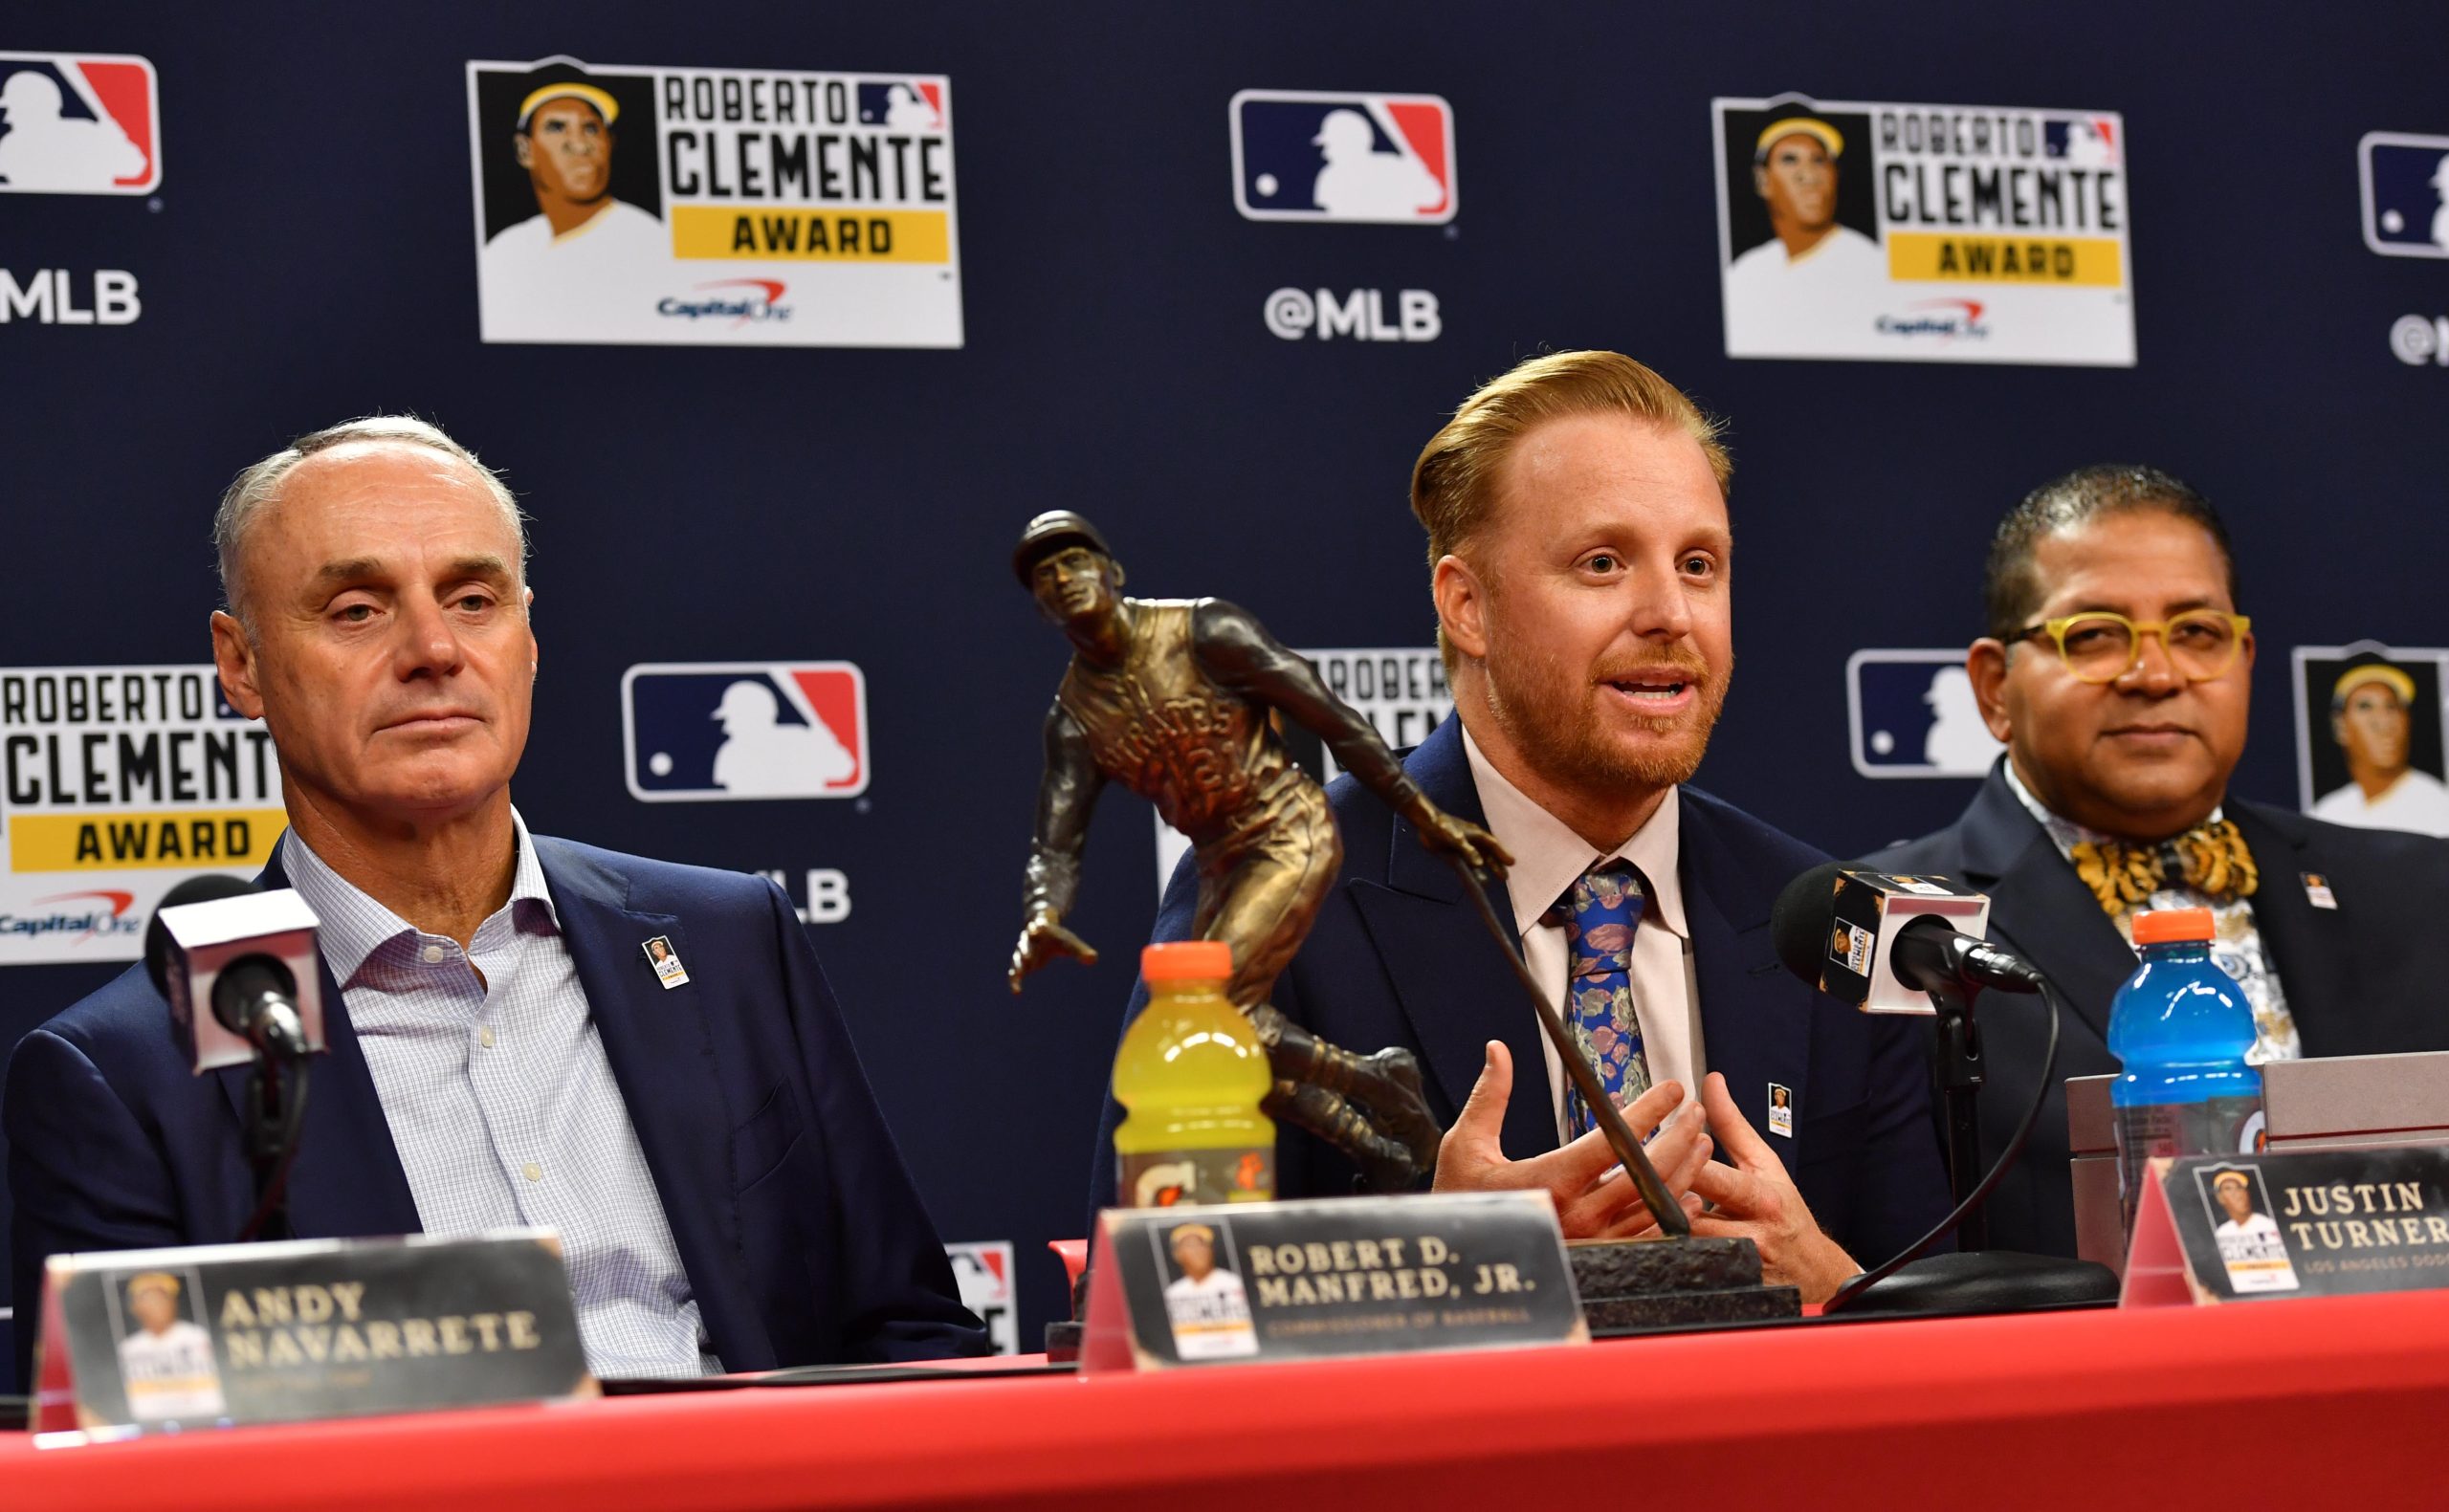 Roberto Clemente Award History, previous winners & what it means